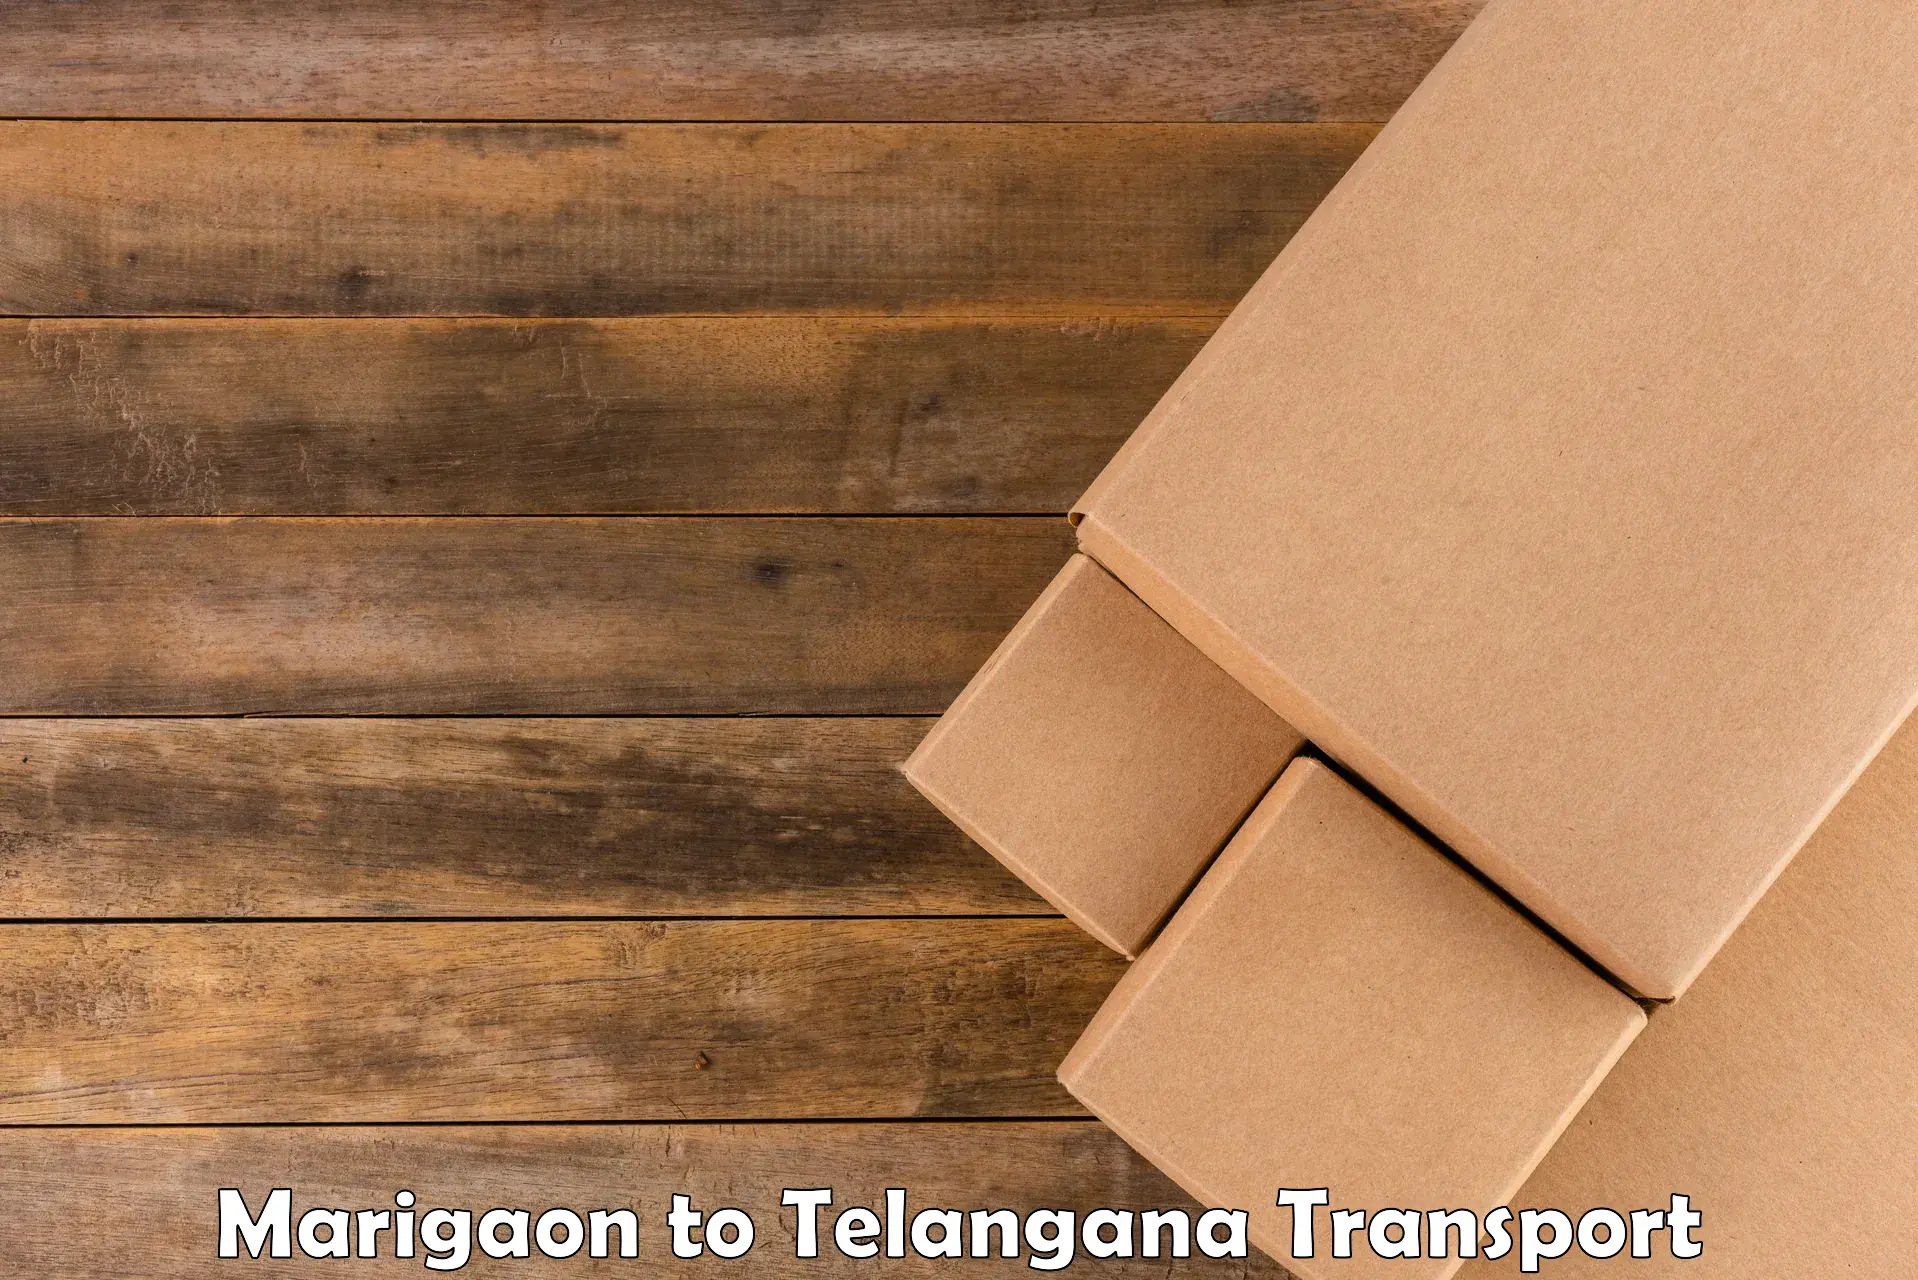 Online transport service Marigaon to Sathupally